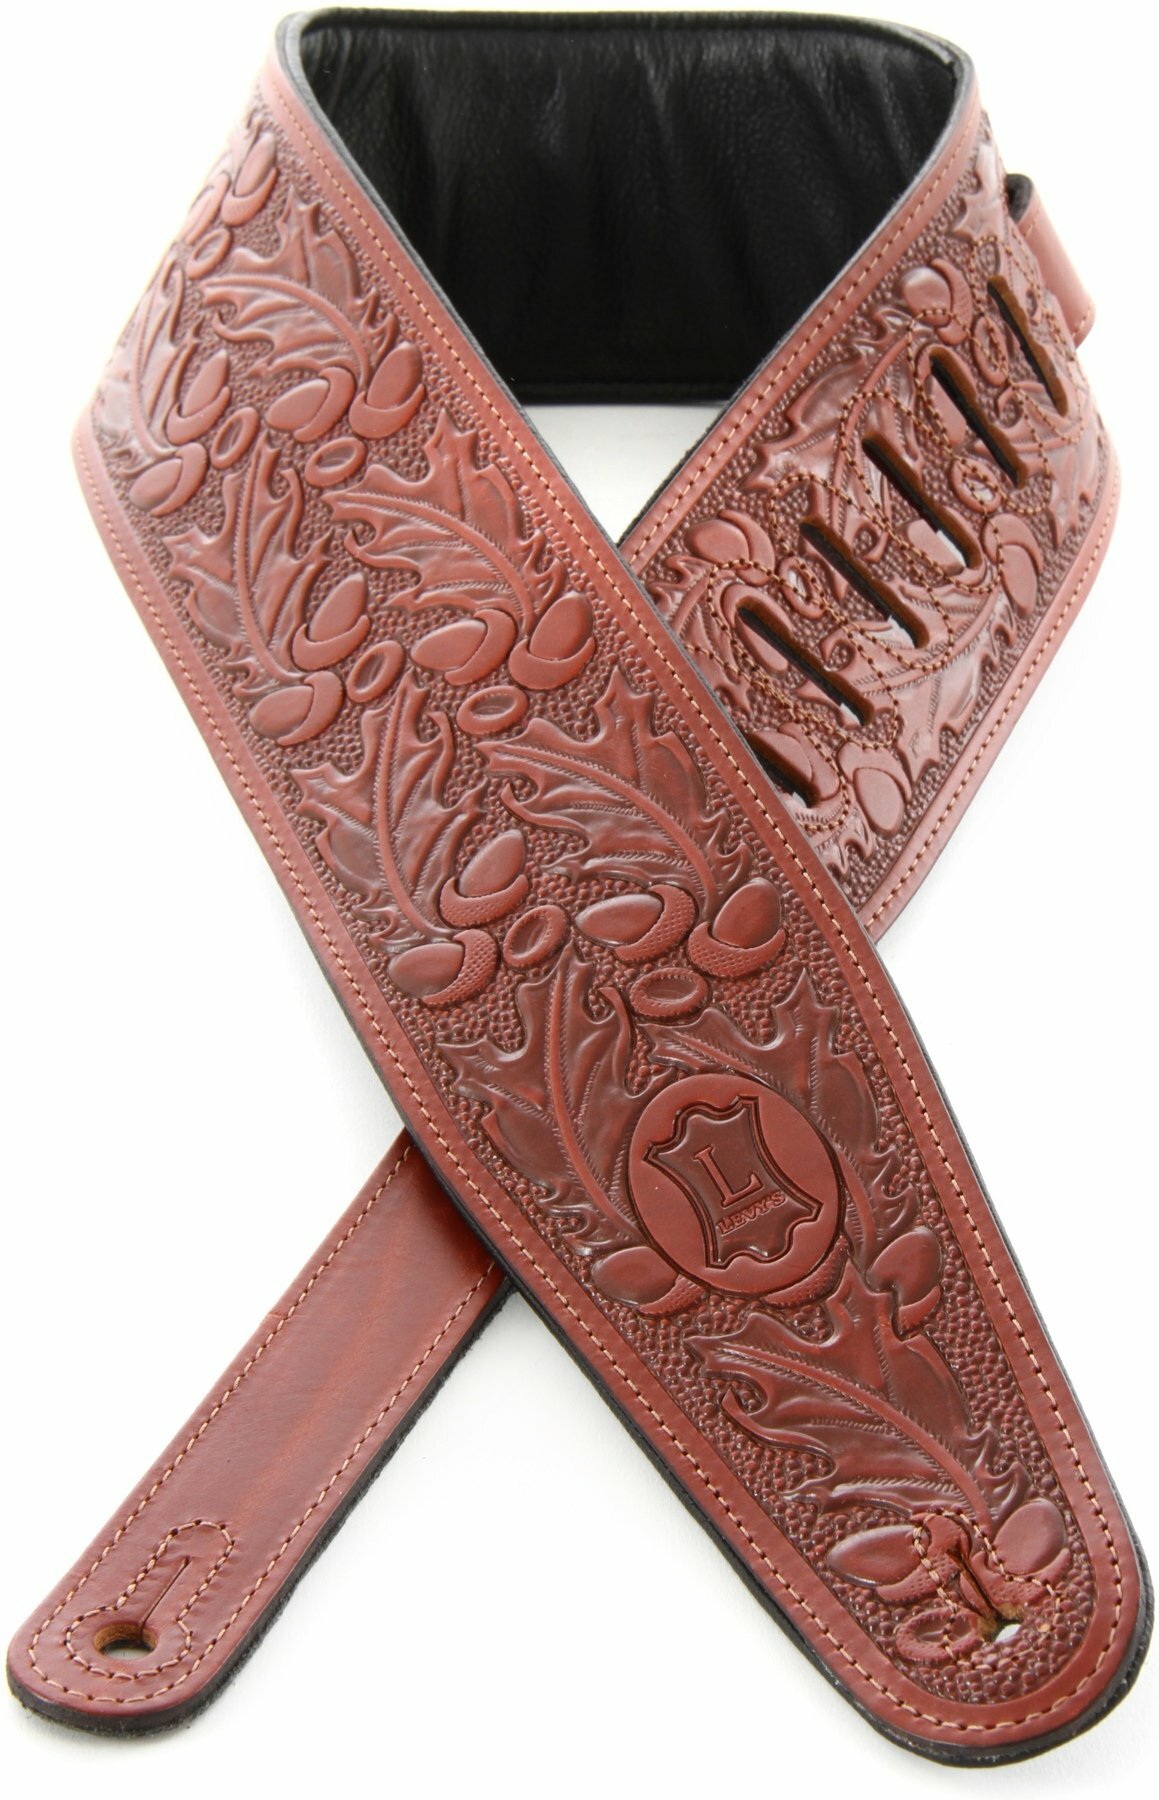 Levy's Classic Tooled Leather Pm44t01 3inc Regular Walnut - Gitaarriem - Main picture